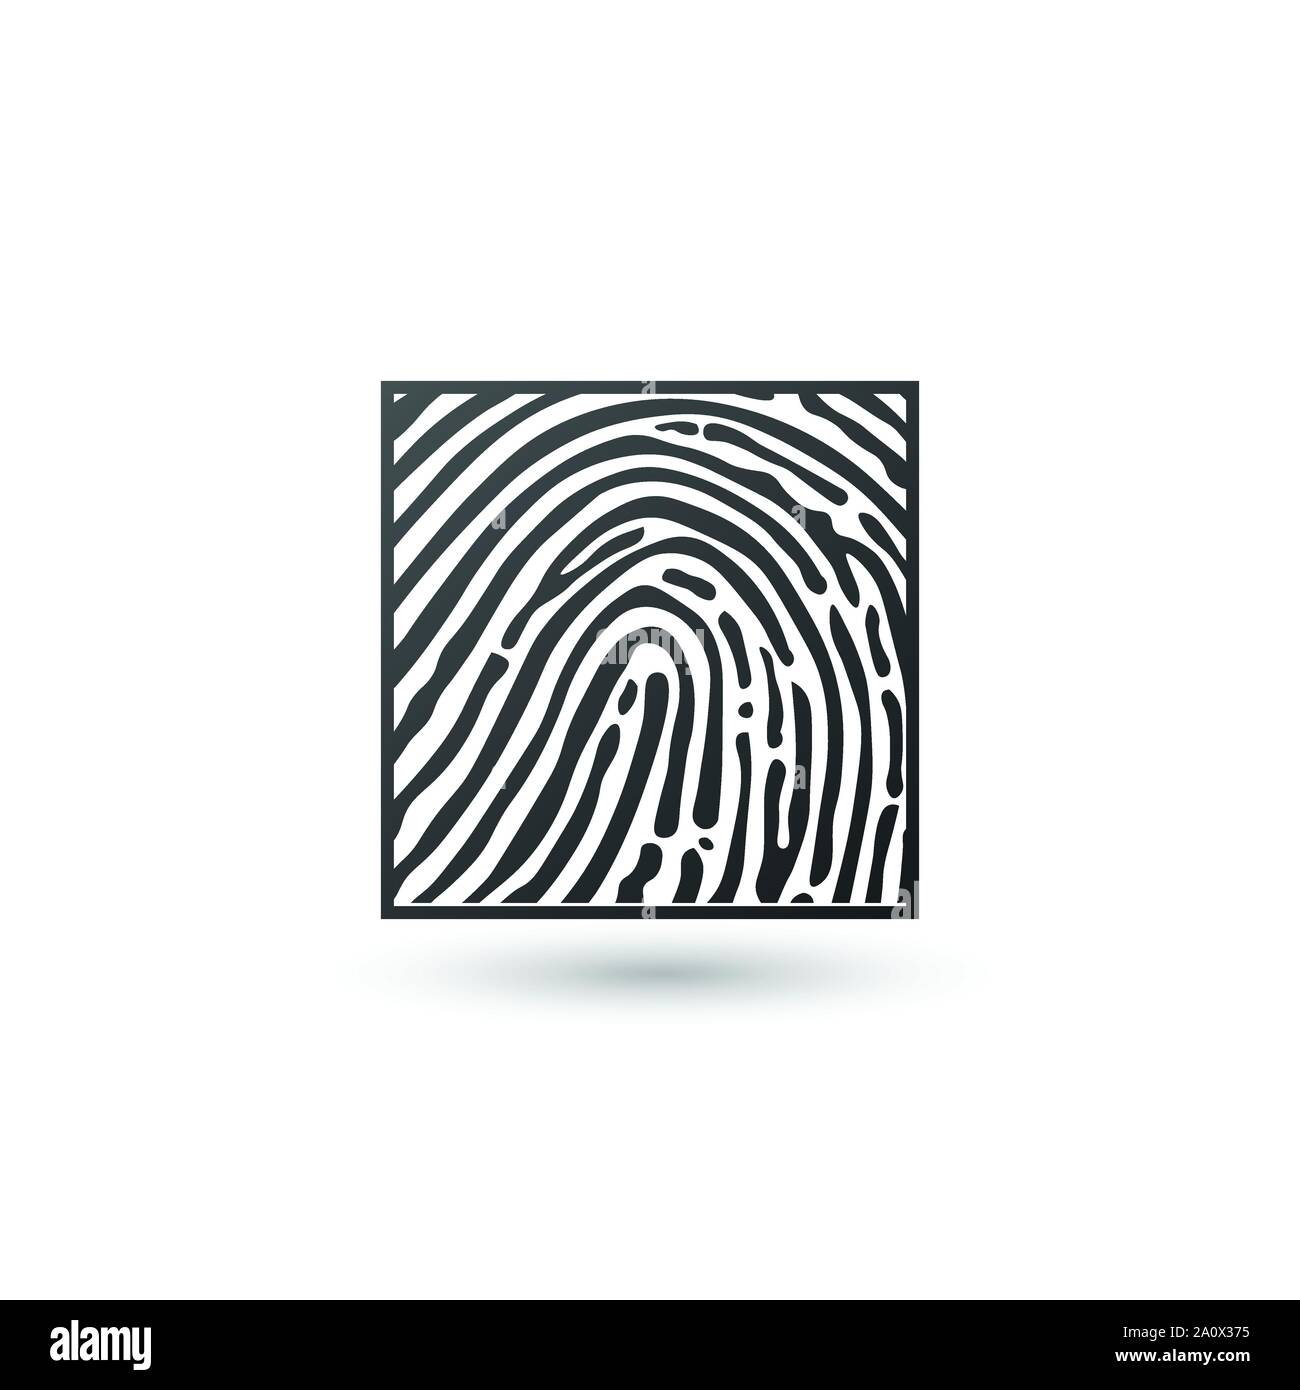 touch Identification fingerprintin the square, id app with shadow. Stock Vector illustration isolated on white background. Stock Vector